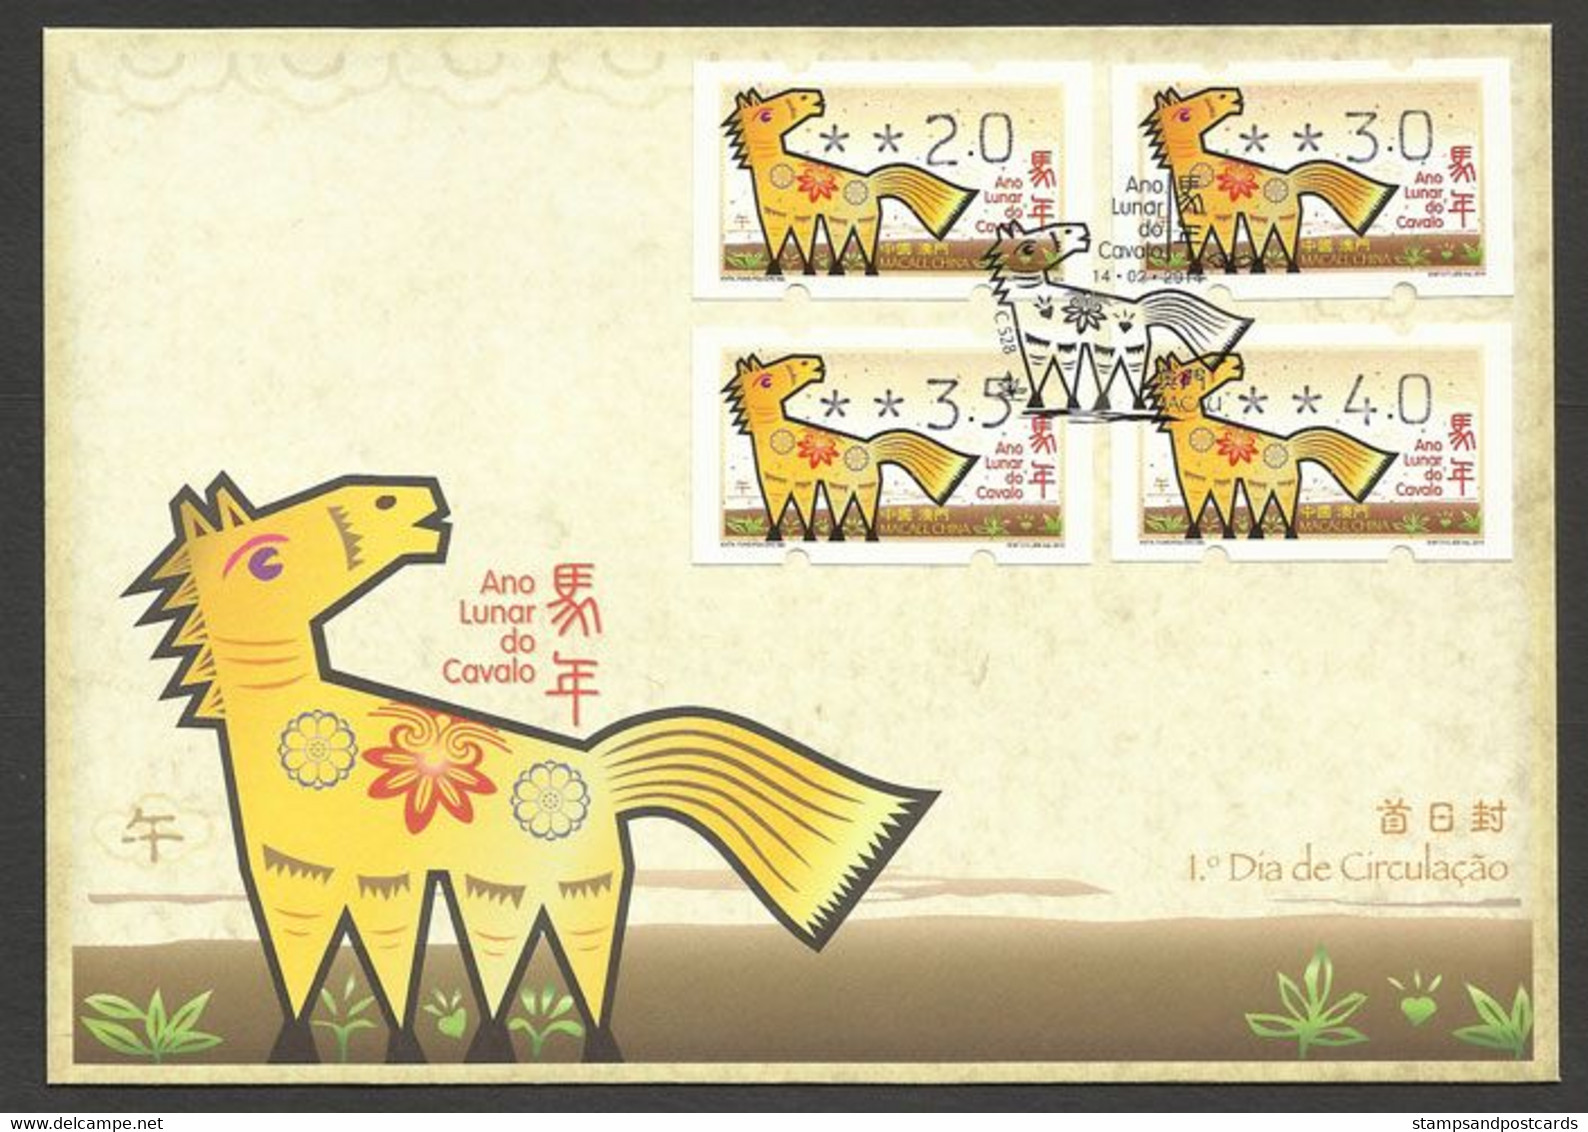 Macau Chine 2014 Année Lunaire Du Cheval Timbres Distributeur Klussendorf FDC Macao China Lunar Year Of The Horse ATM - Distribuidores